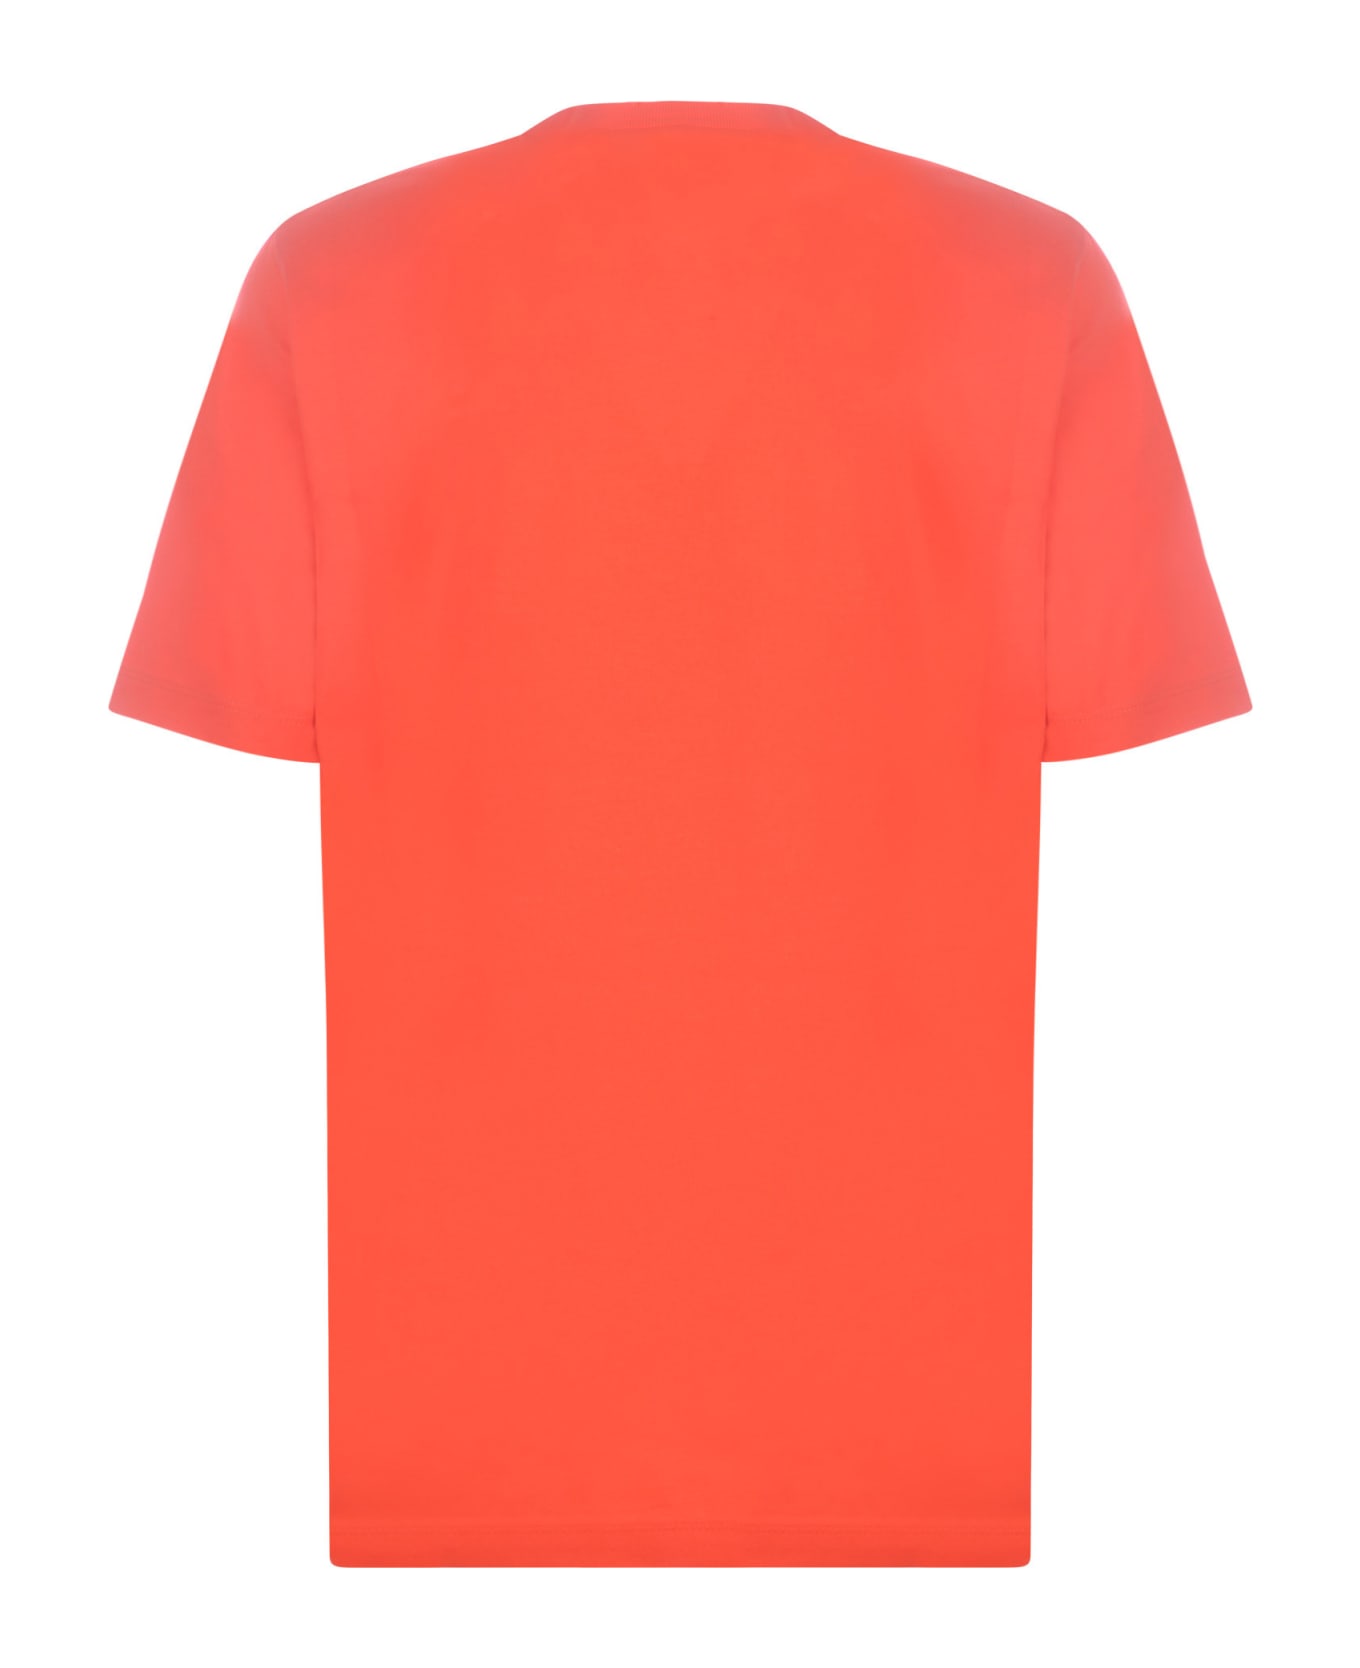 Dsquared2 T-shirt Dsquared2 'icon' In Cotton Jersey - Orange Tシャツ